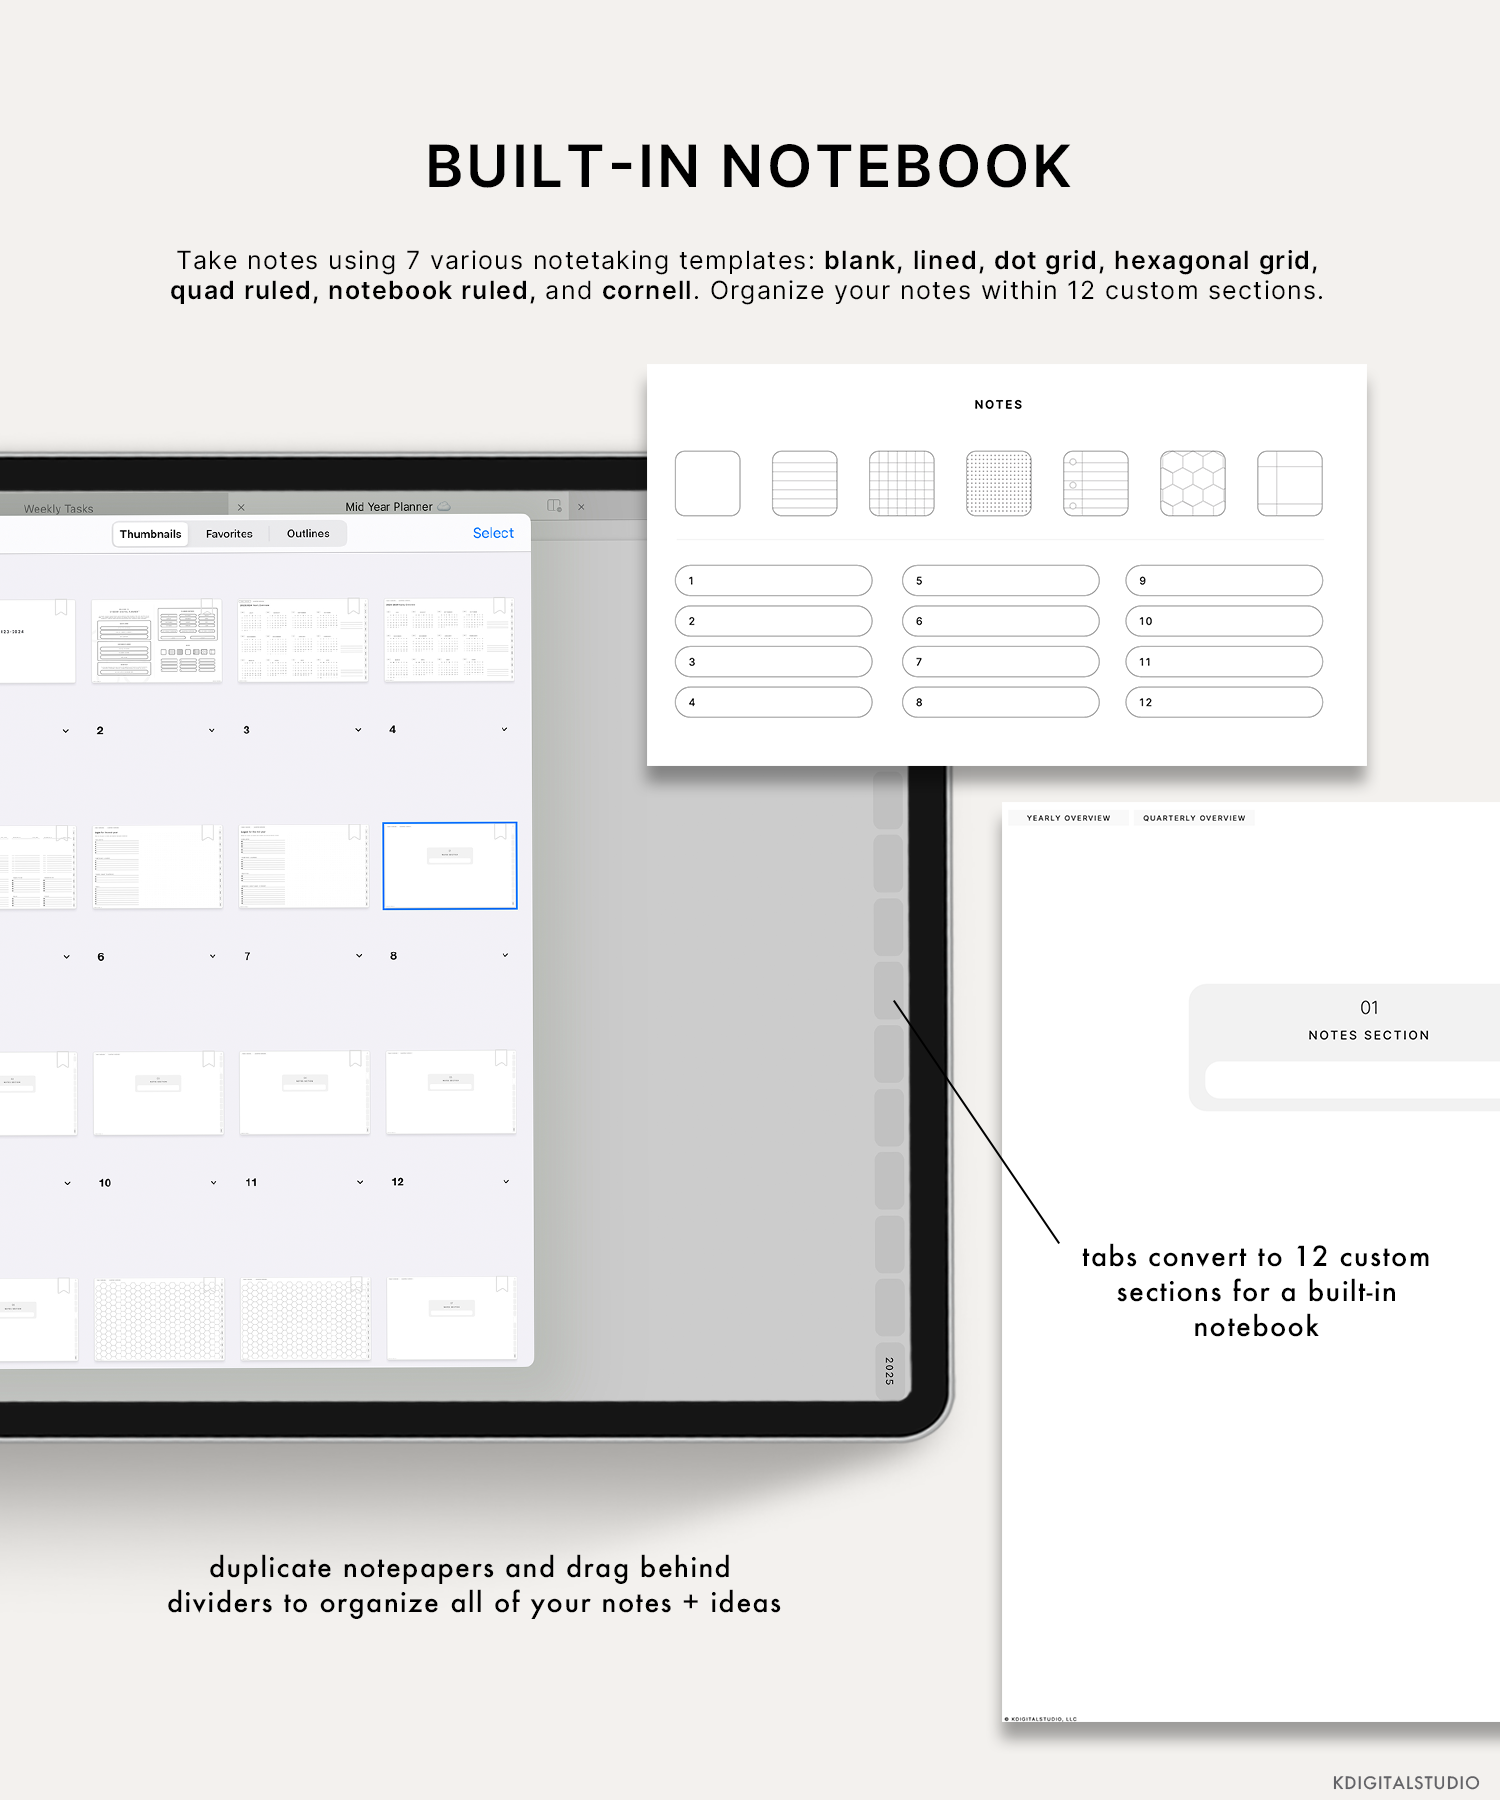 Take notes using 7 various notetaking templates: blank, lined, dot grid, hexagonal grid, quad ruled, notebook ruled, and cornell. Organize your notes within the 12 custom notes sections.